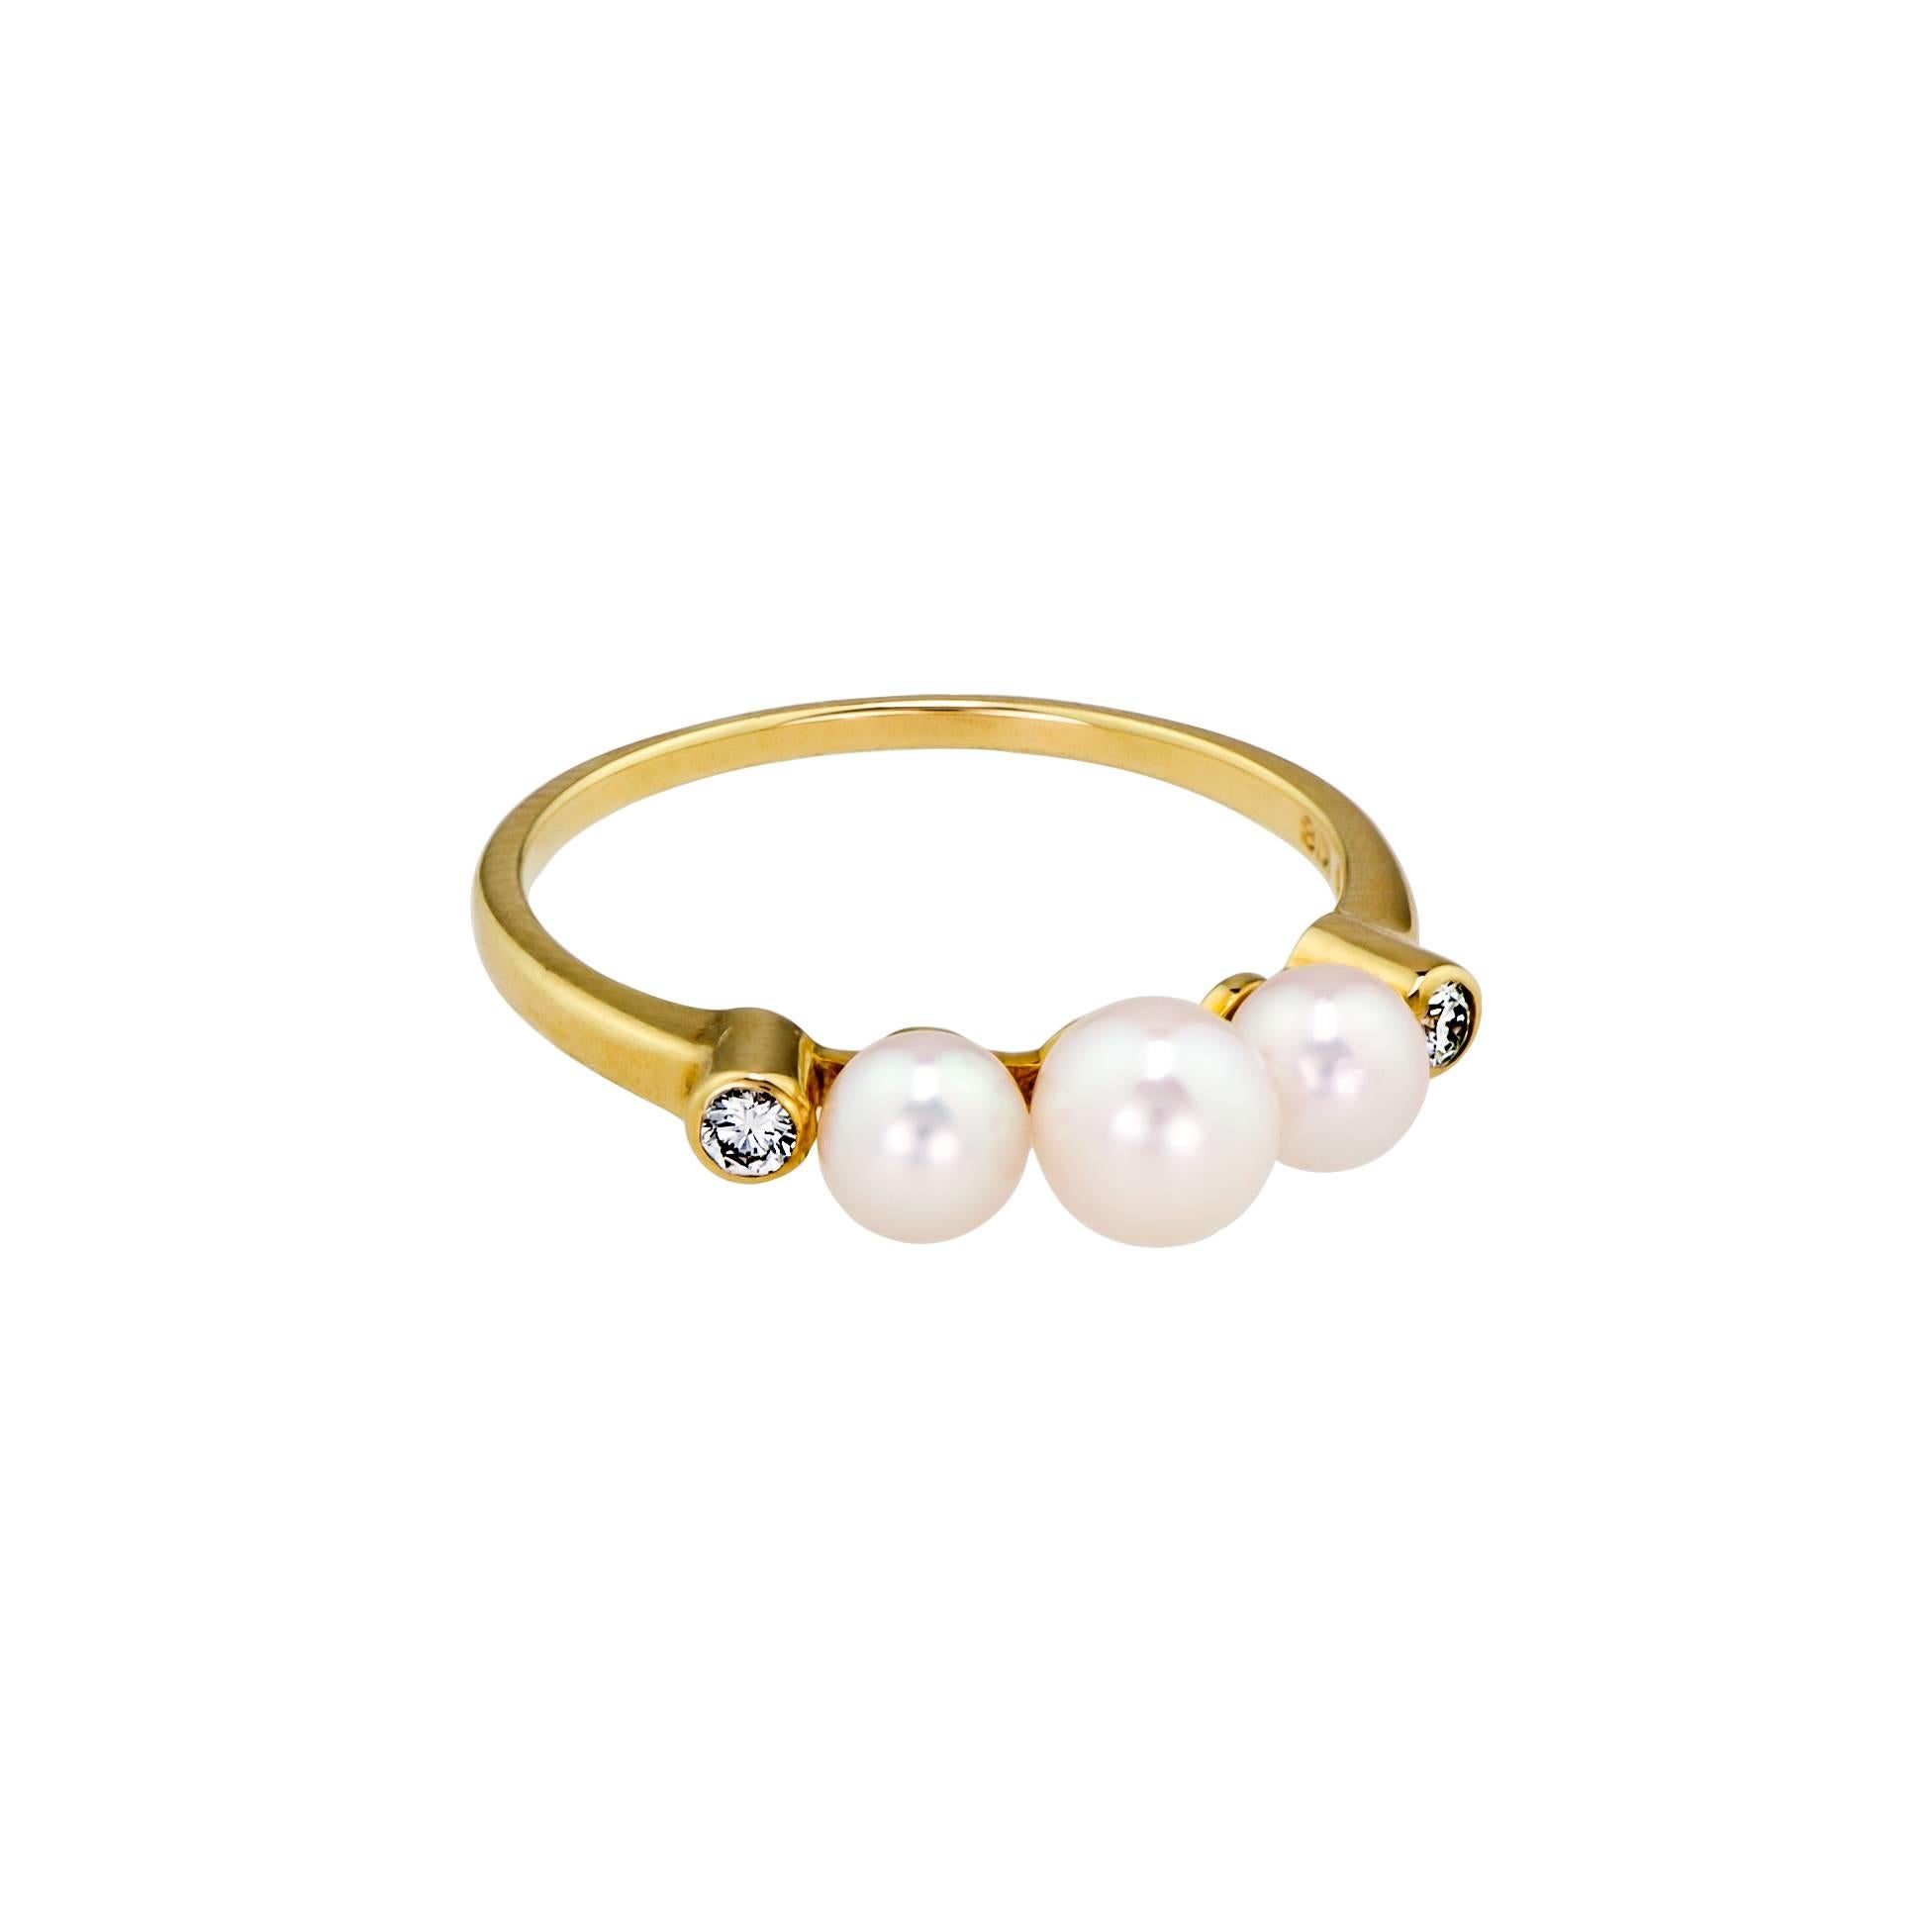 Sweet Vintage Mikimoto cultured pearl diamond and 18kt yellow gold ring - 3 fine cultured pearls - center 5mm two sides 4mm - two small round brilliant cut natural diamonds bezel set - 18kt yellow gold mount - hallmarked in shank- Excellent condition